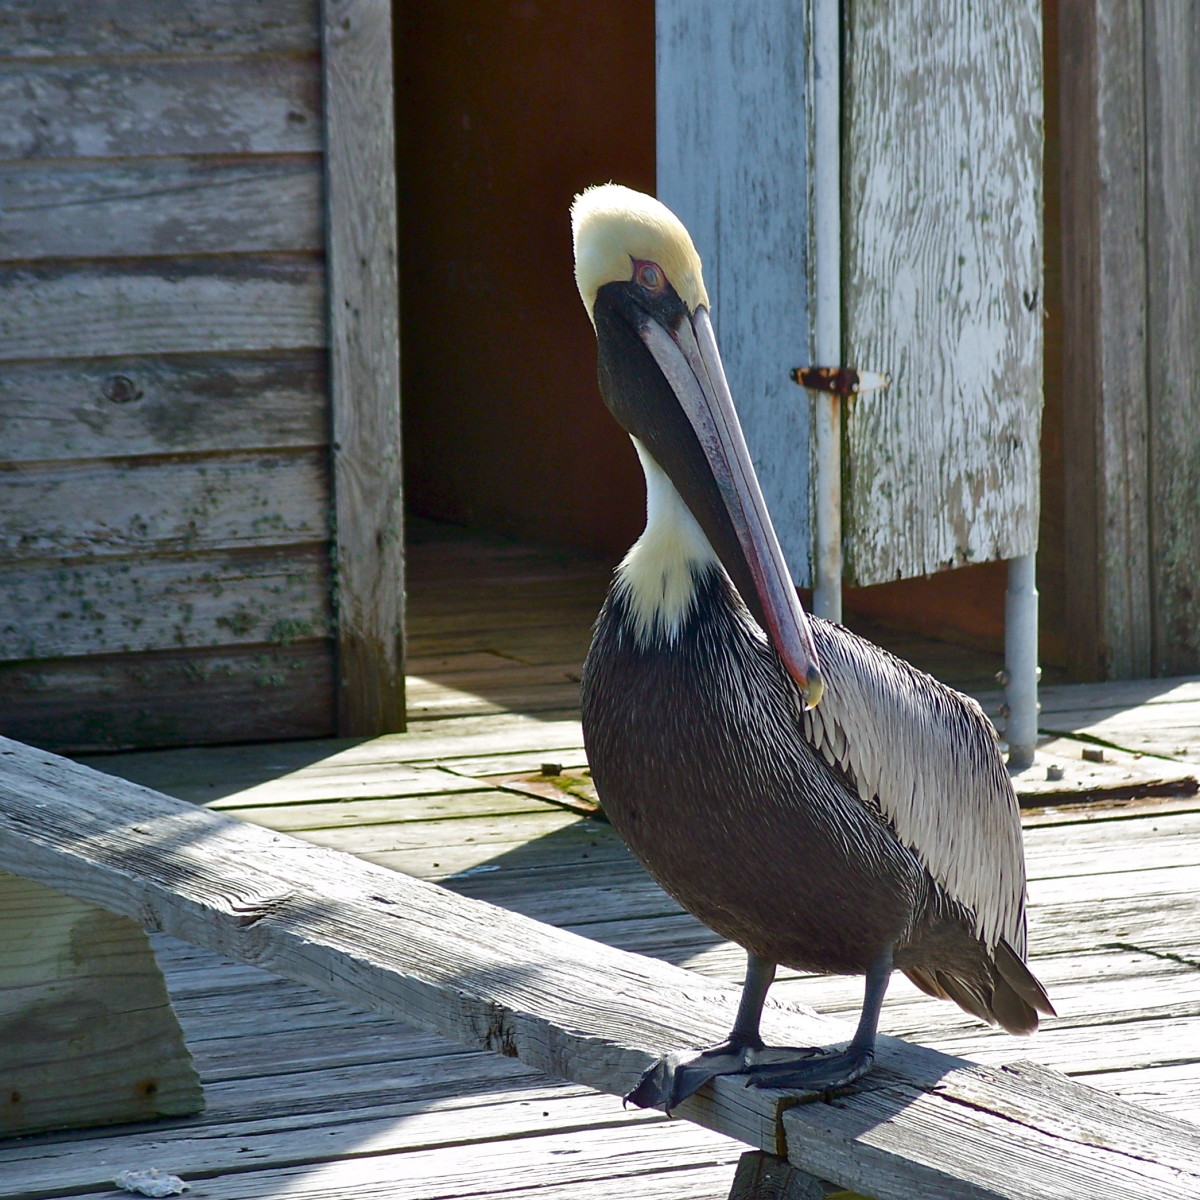 This pelican stood guard on the boardwalk in Cedar Key, perhaps waiting patiently for a generous fisherman to share his catch.